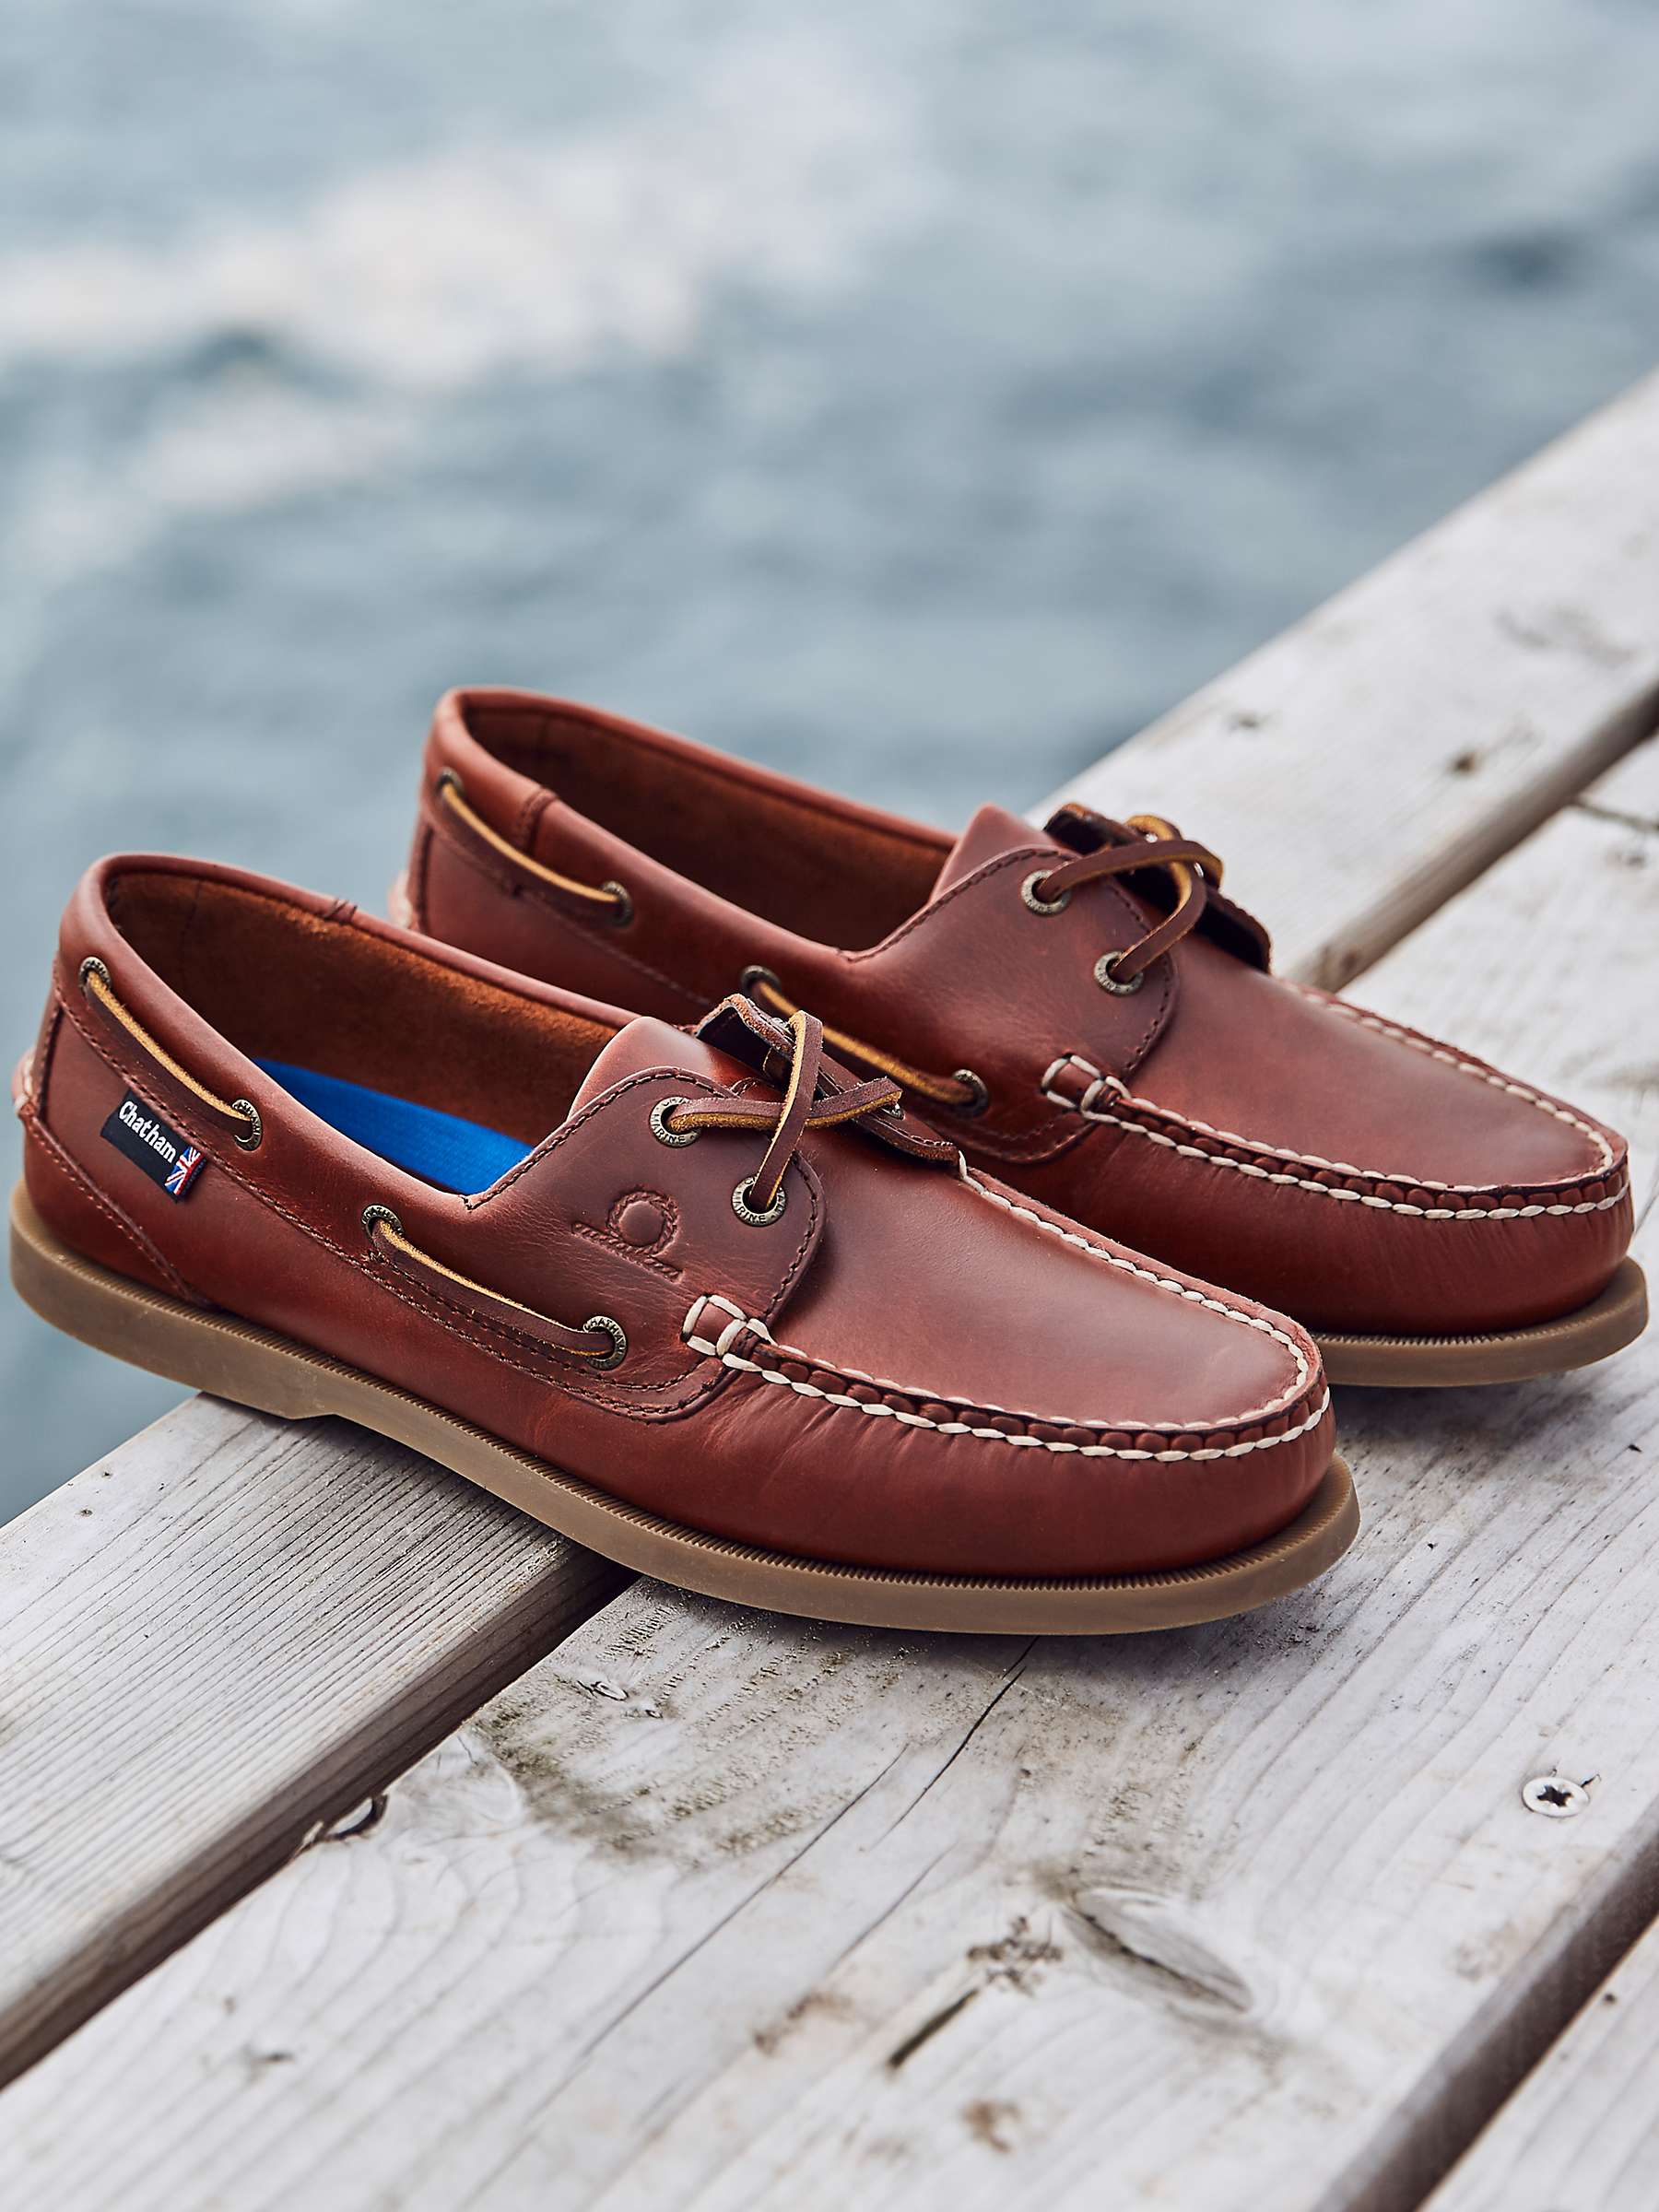 Chatham Mens Deck II G2 Pont Chaussures en cuir noisette-Tailles 7 To 13 